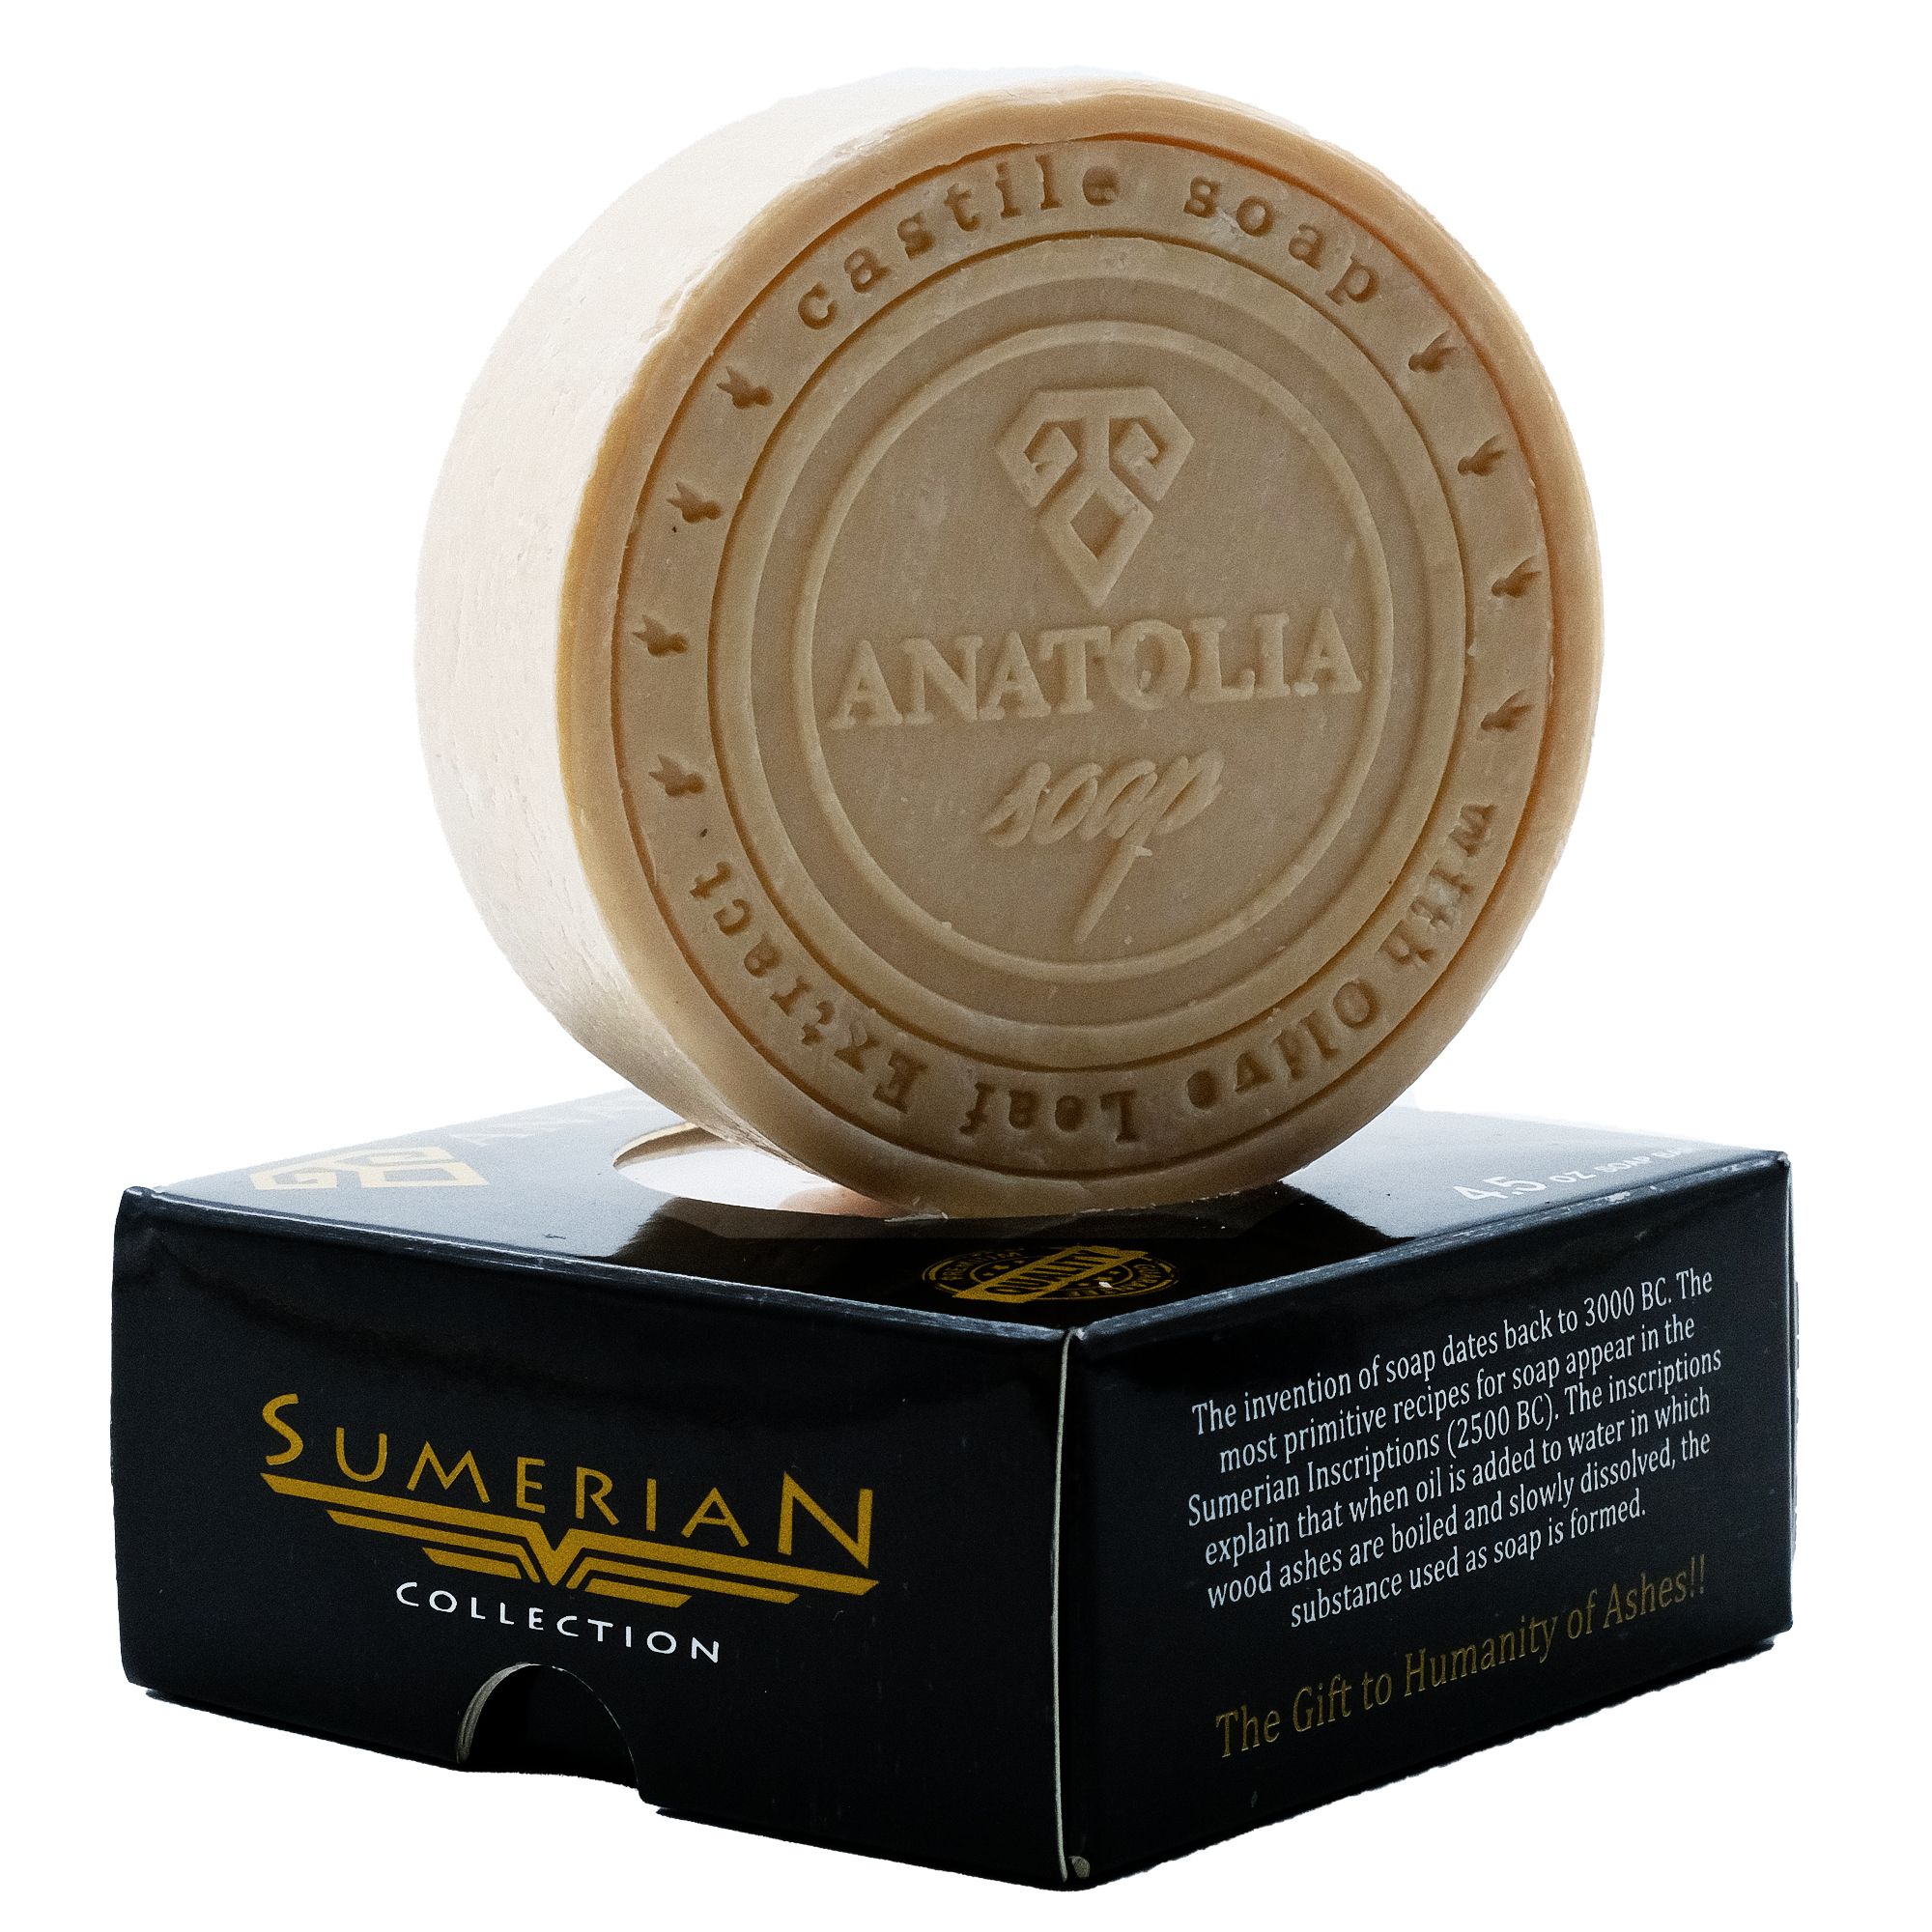 Sumerian Collection Saffron Balm Geranium Soap has Aromatherapy Features and Makes You Look Younger with Cell Renewal.